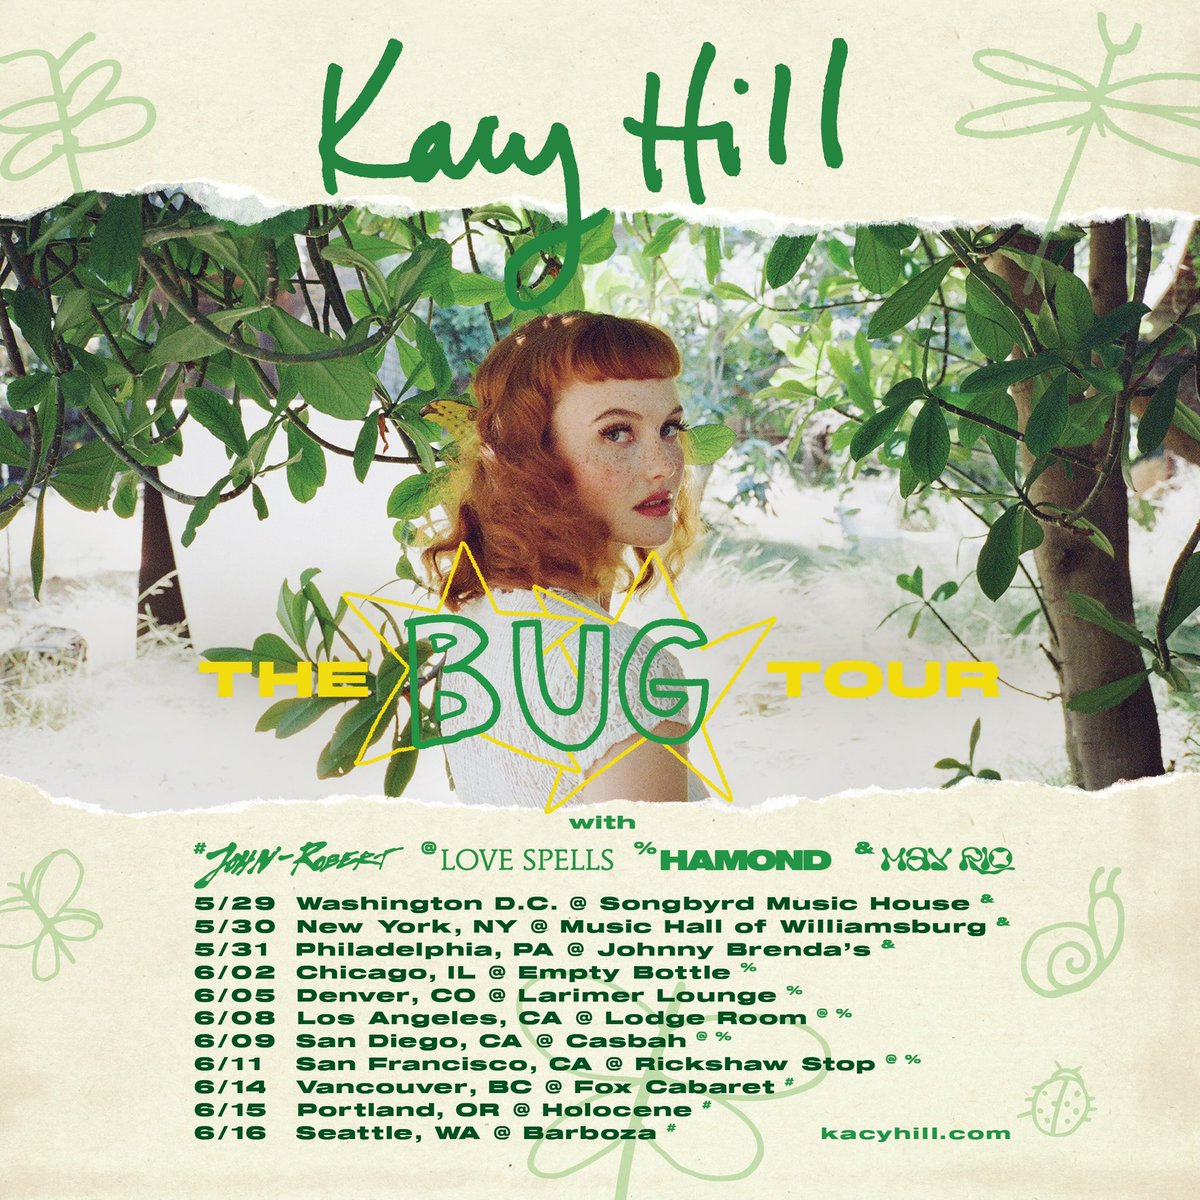 The BUG Tour starts in 9 days 😍🪱🐛🐞🌱 tickets at kacyhill.com